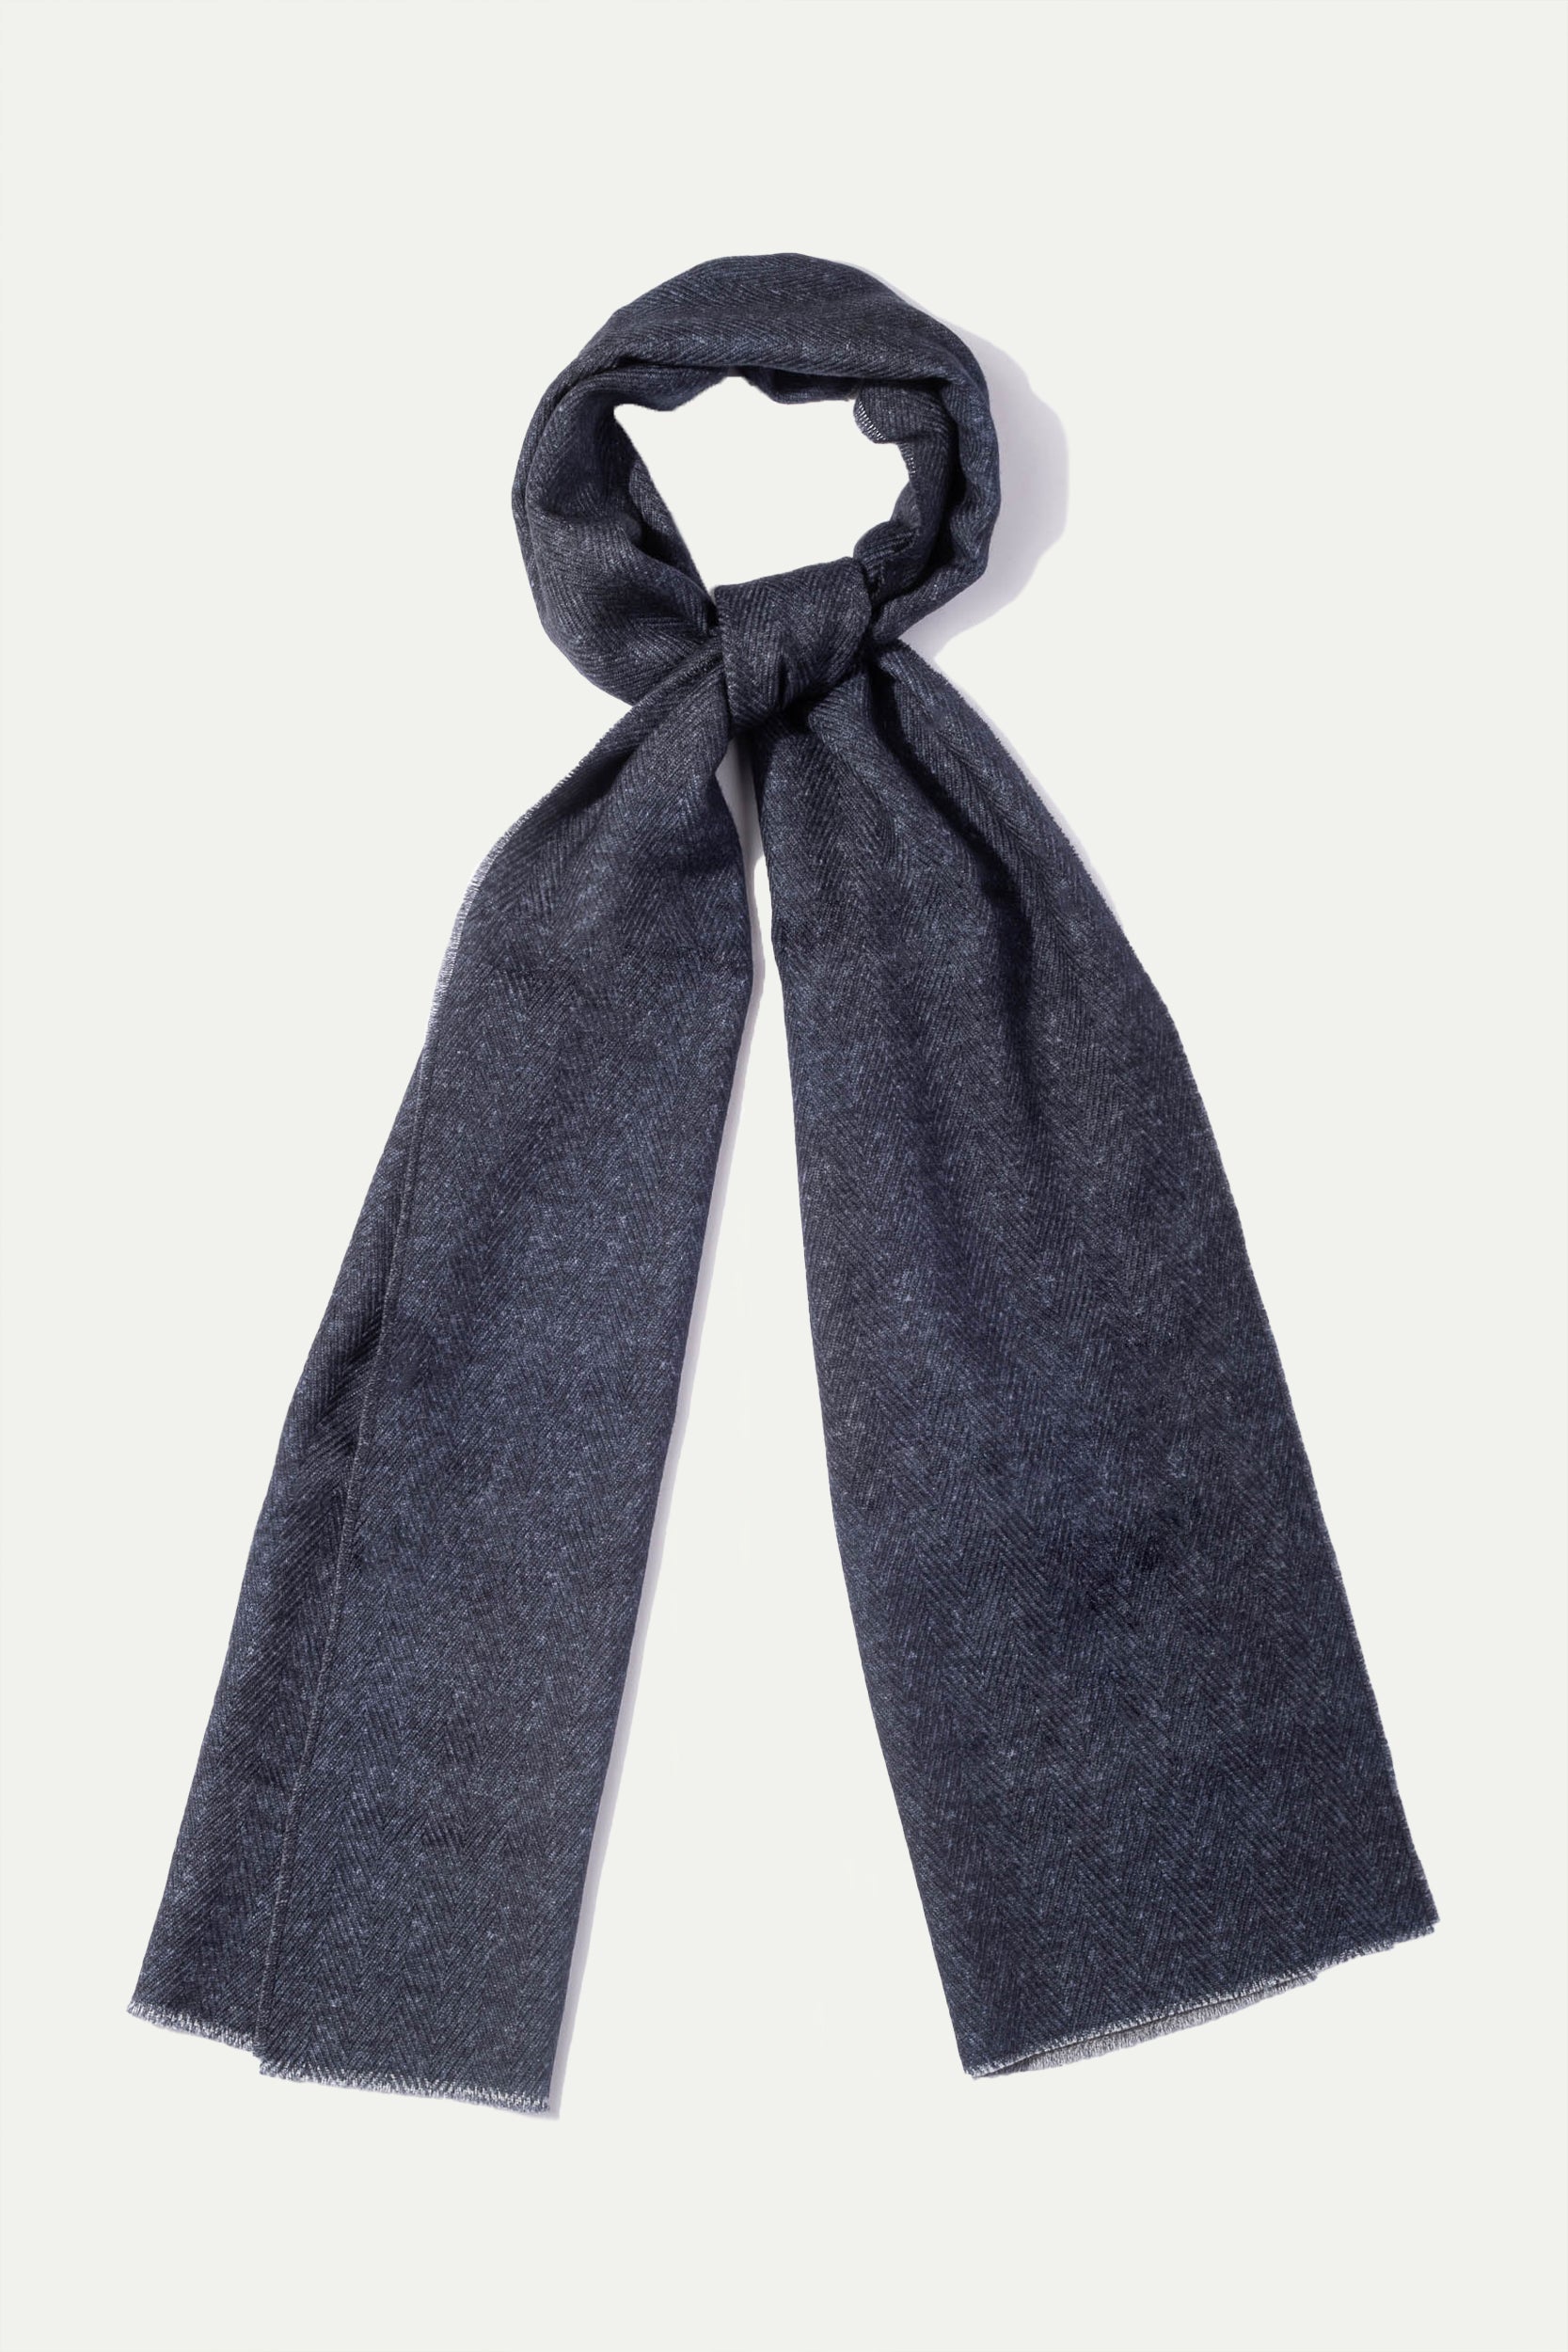 Blue and grey reversible herringbone scarf - Made in Italy